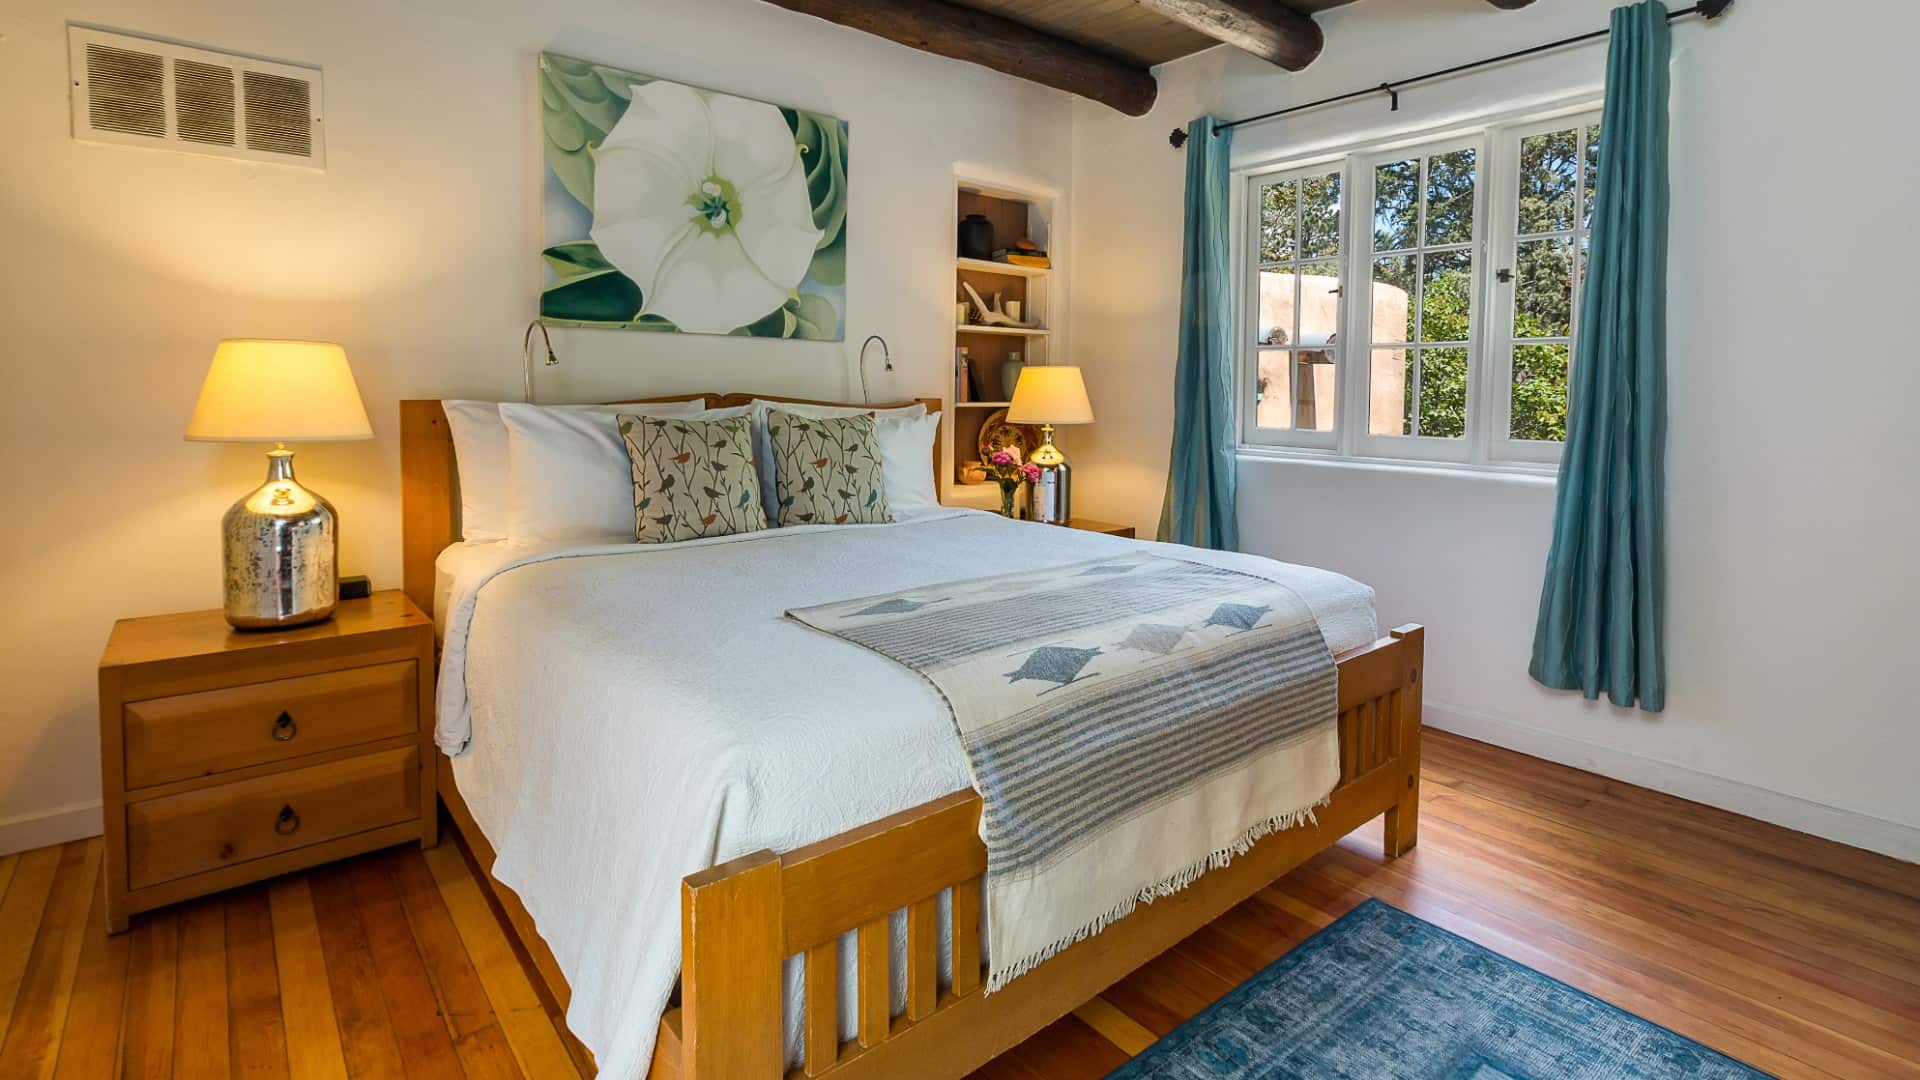 Bed with white bedding in room with plastered walls, beams in ceiling, Quaker-style furniture and Georgia O'Keefe print.